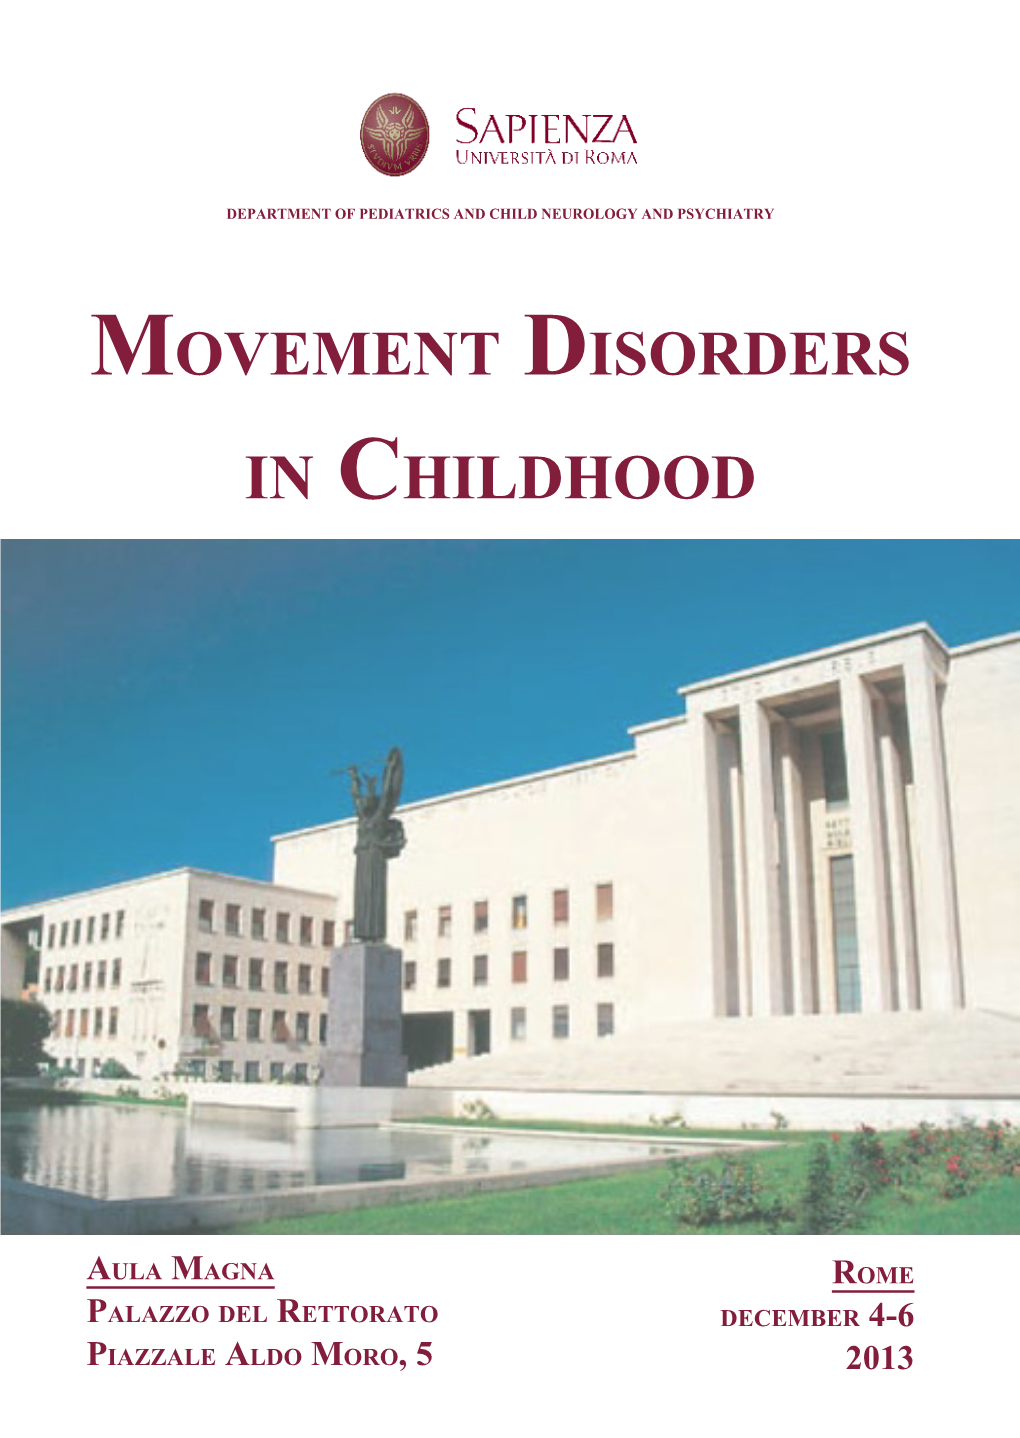 Movement Disorders in Childhood, Rome Dec